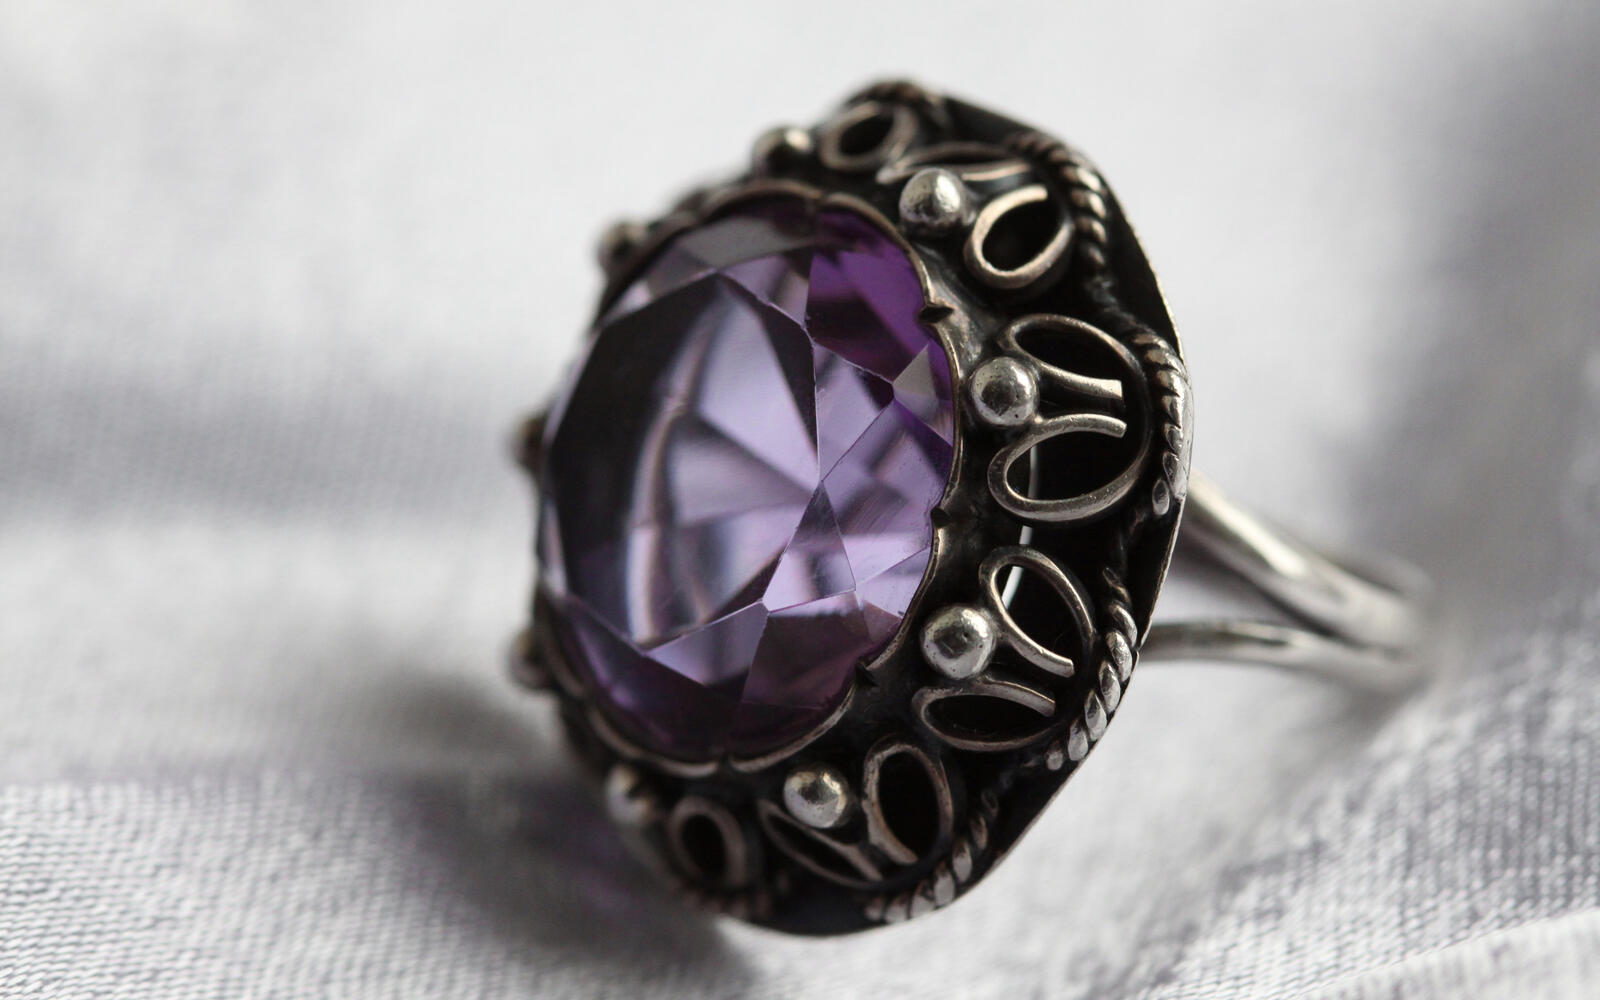 Wallpapers ring jewelry stone amethyst on the desktop